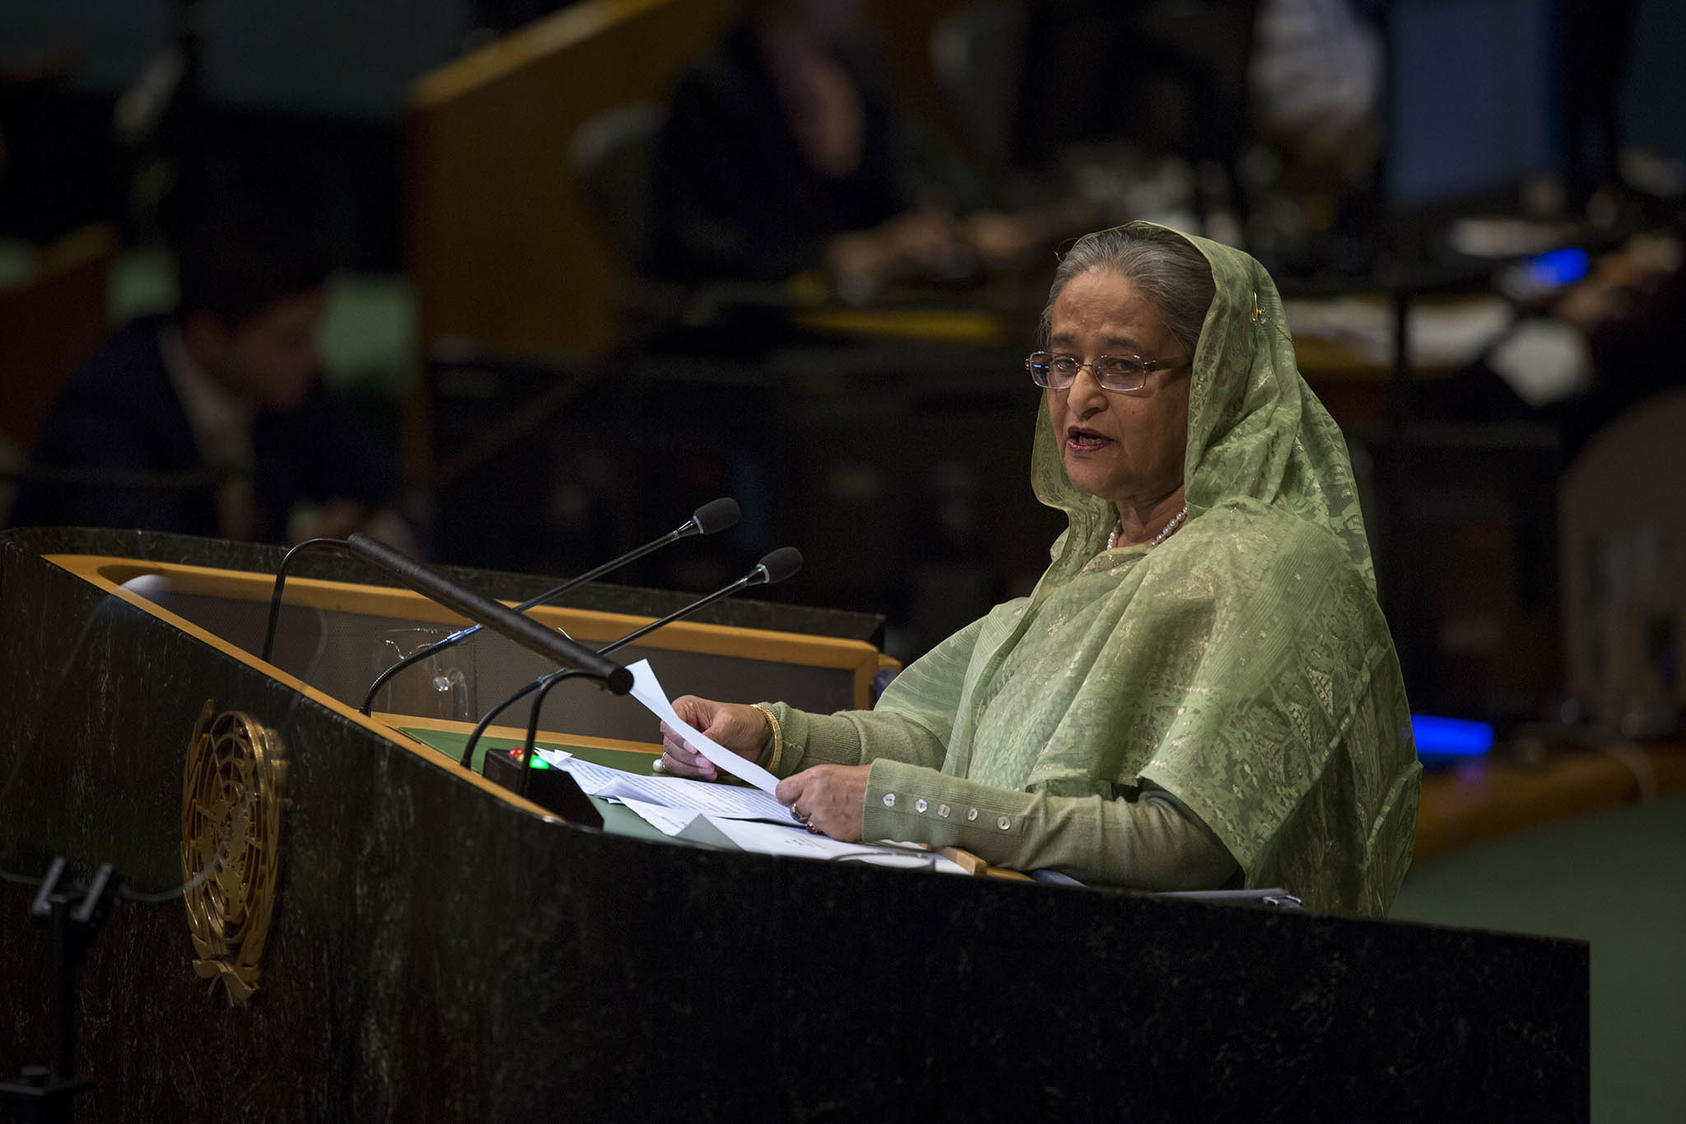 Prime Minister Sheikh Hasina of Bangladesh addresses the 73rd United Nations General Assembly in New York, Sept. 27, 2018. (Dave Sanders/The New York Times)